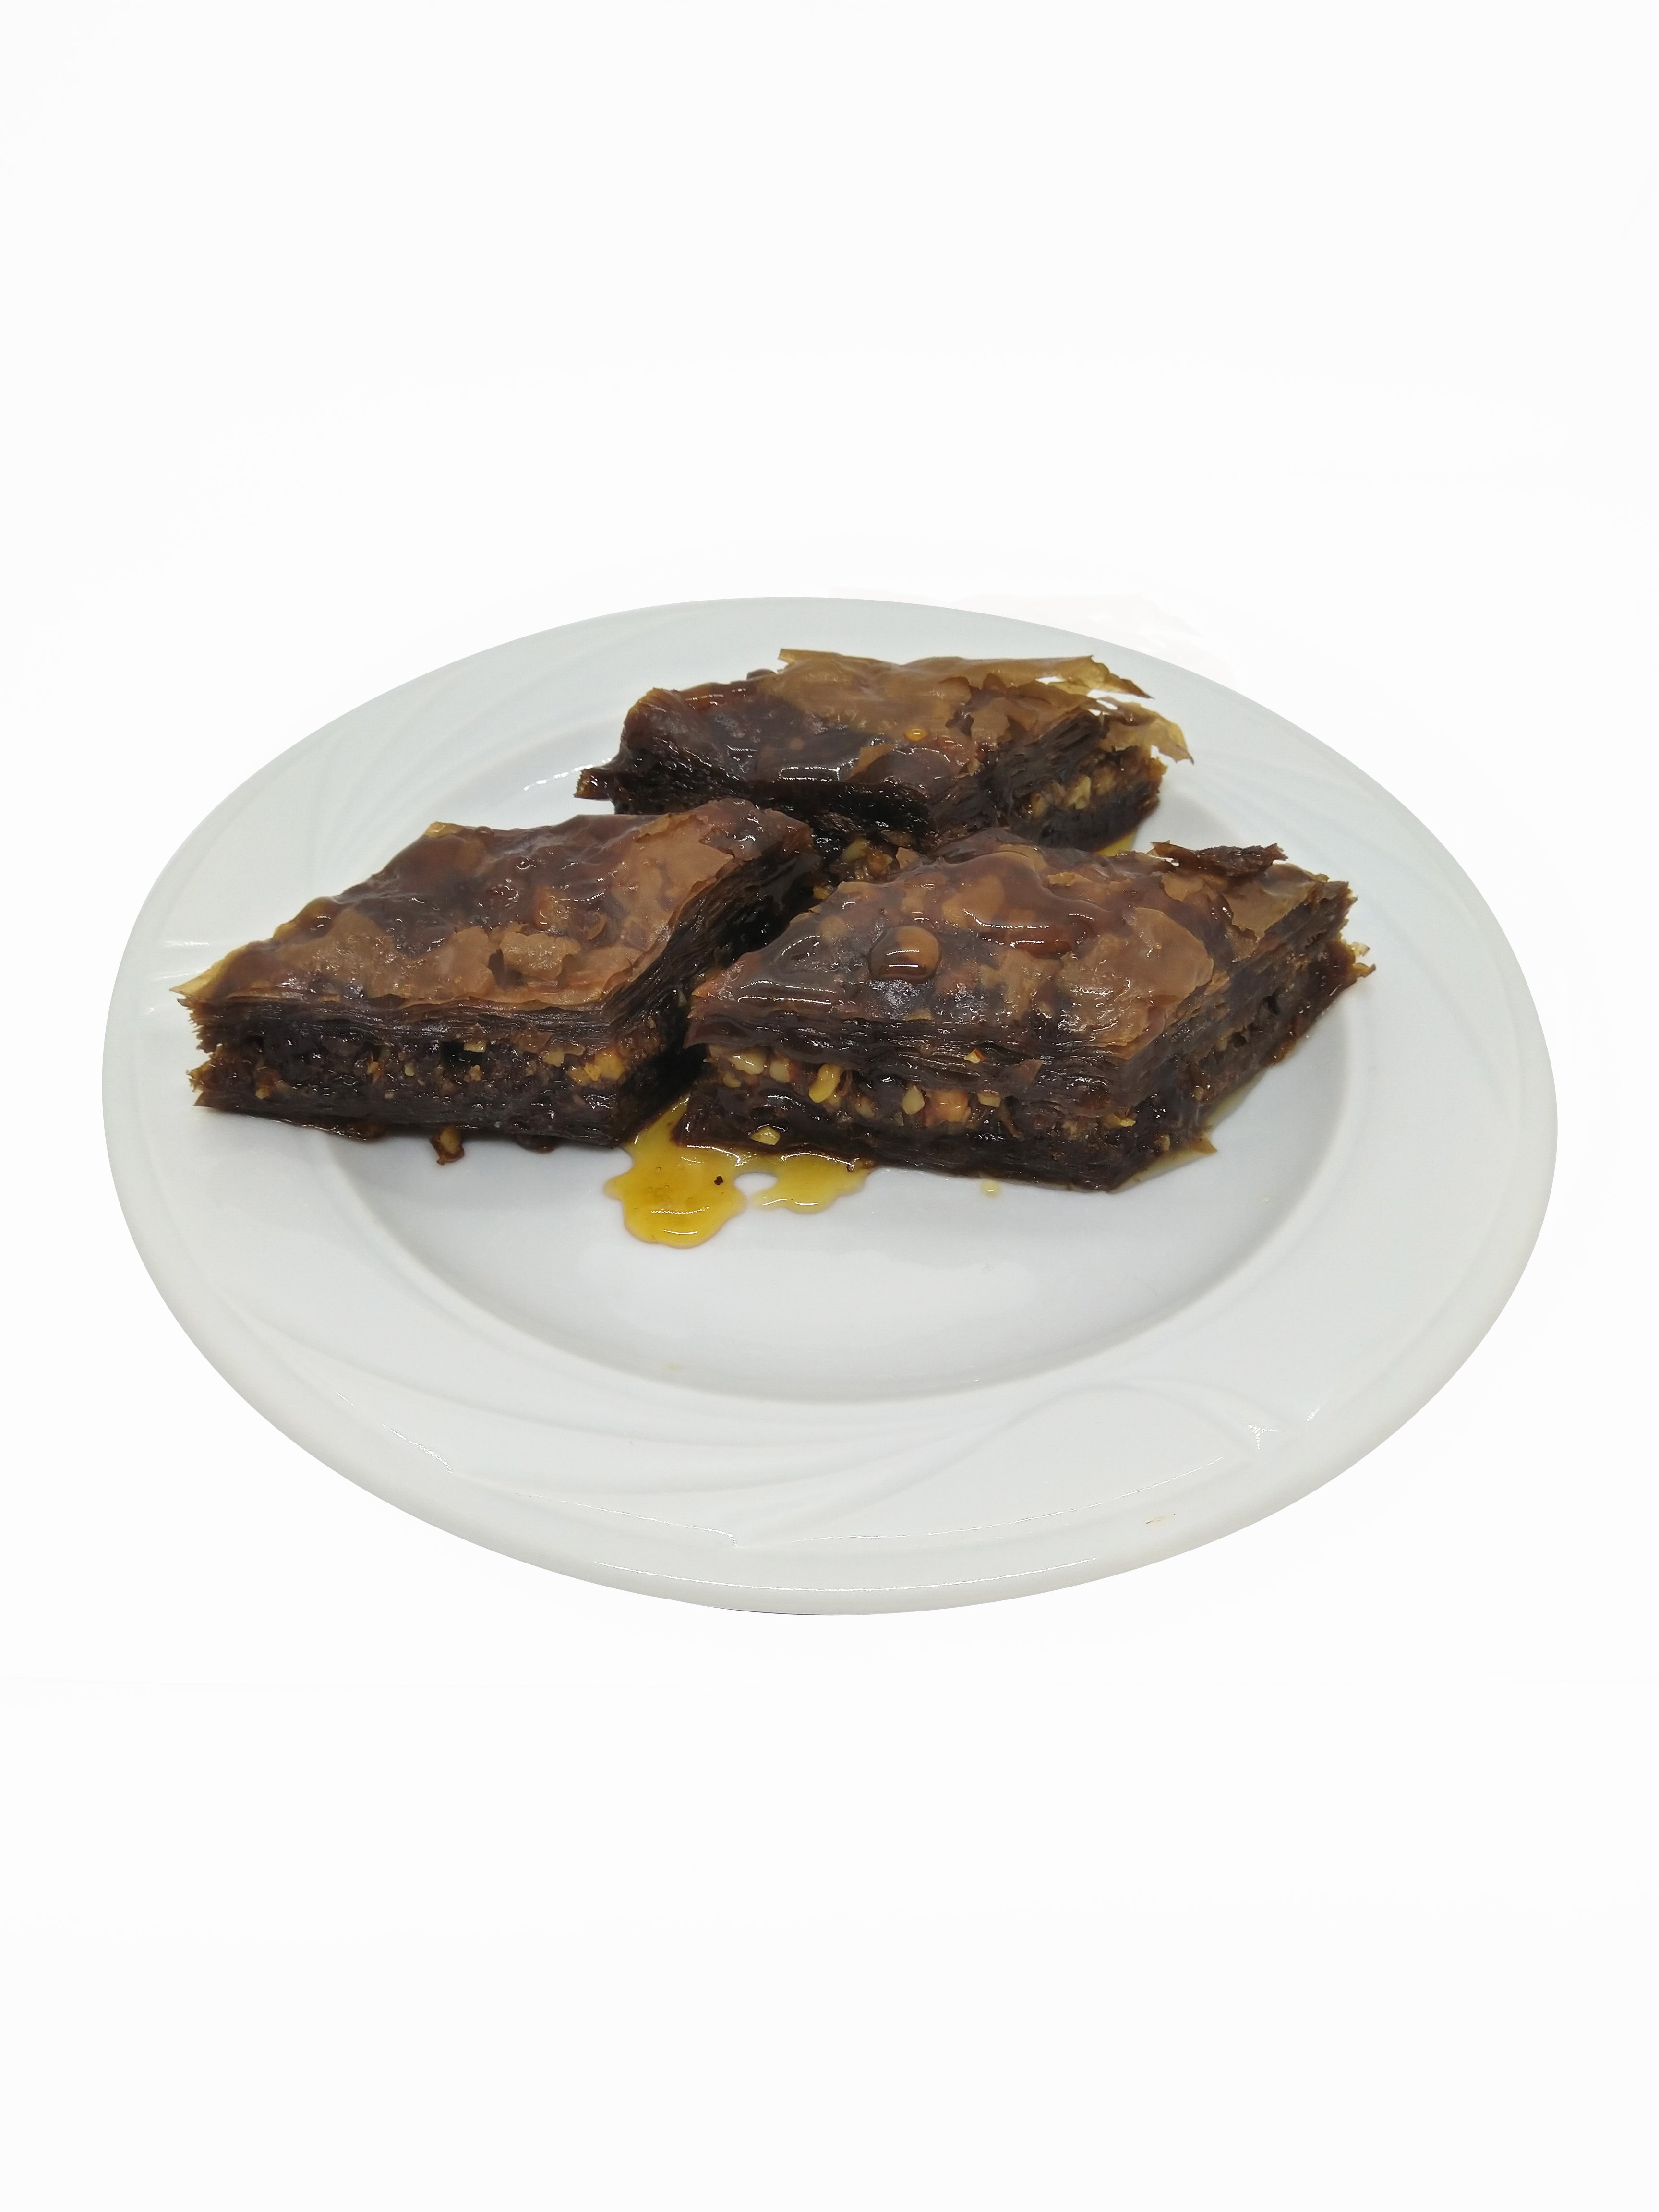 Chocolate Baklava with Almonds and Syrup 6